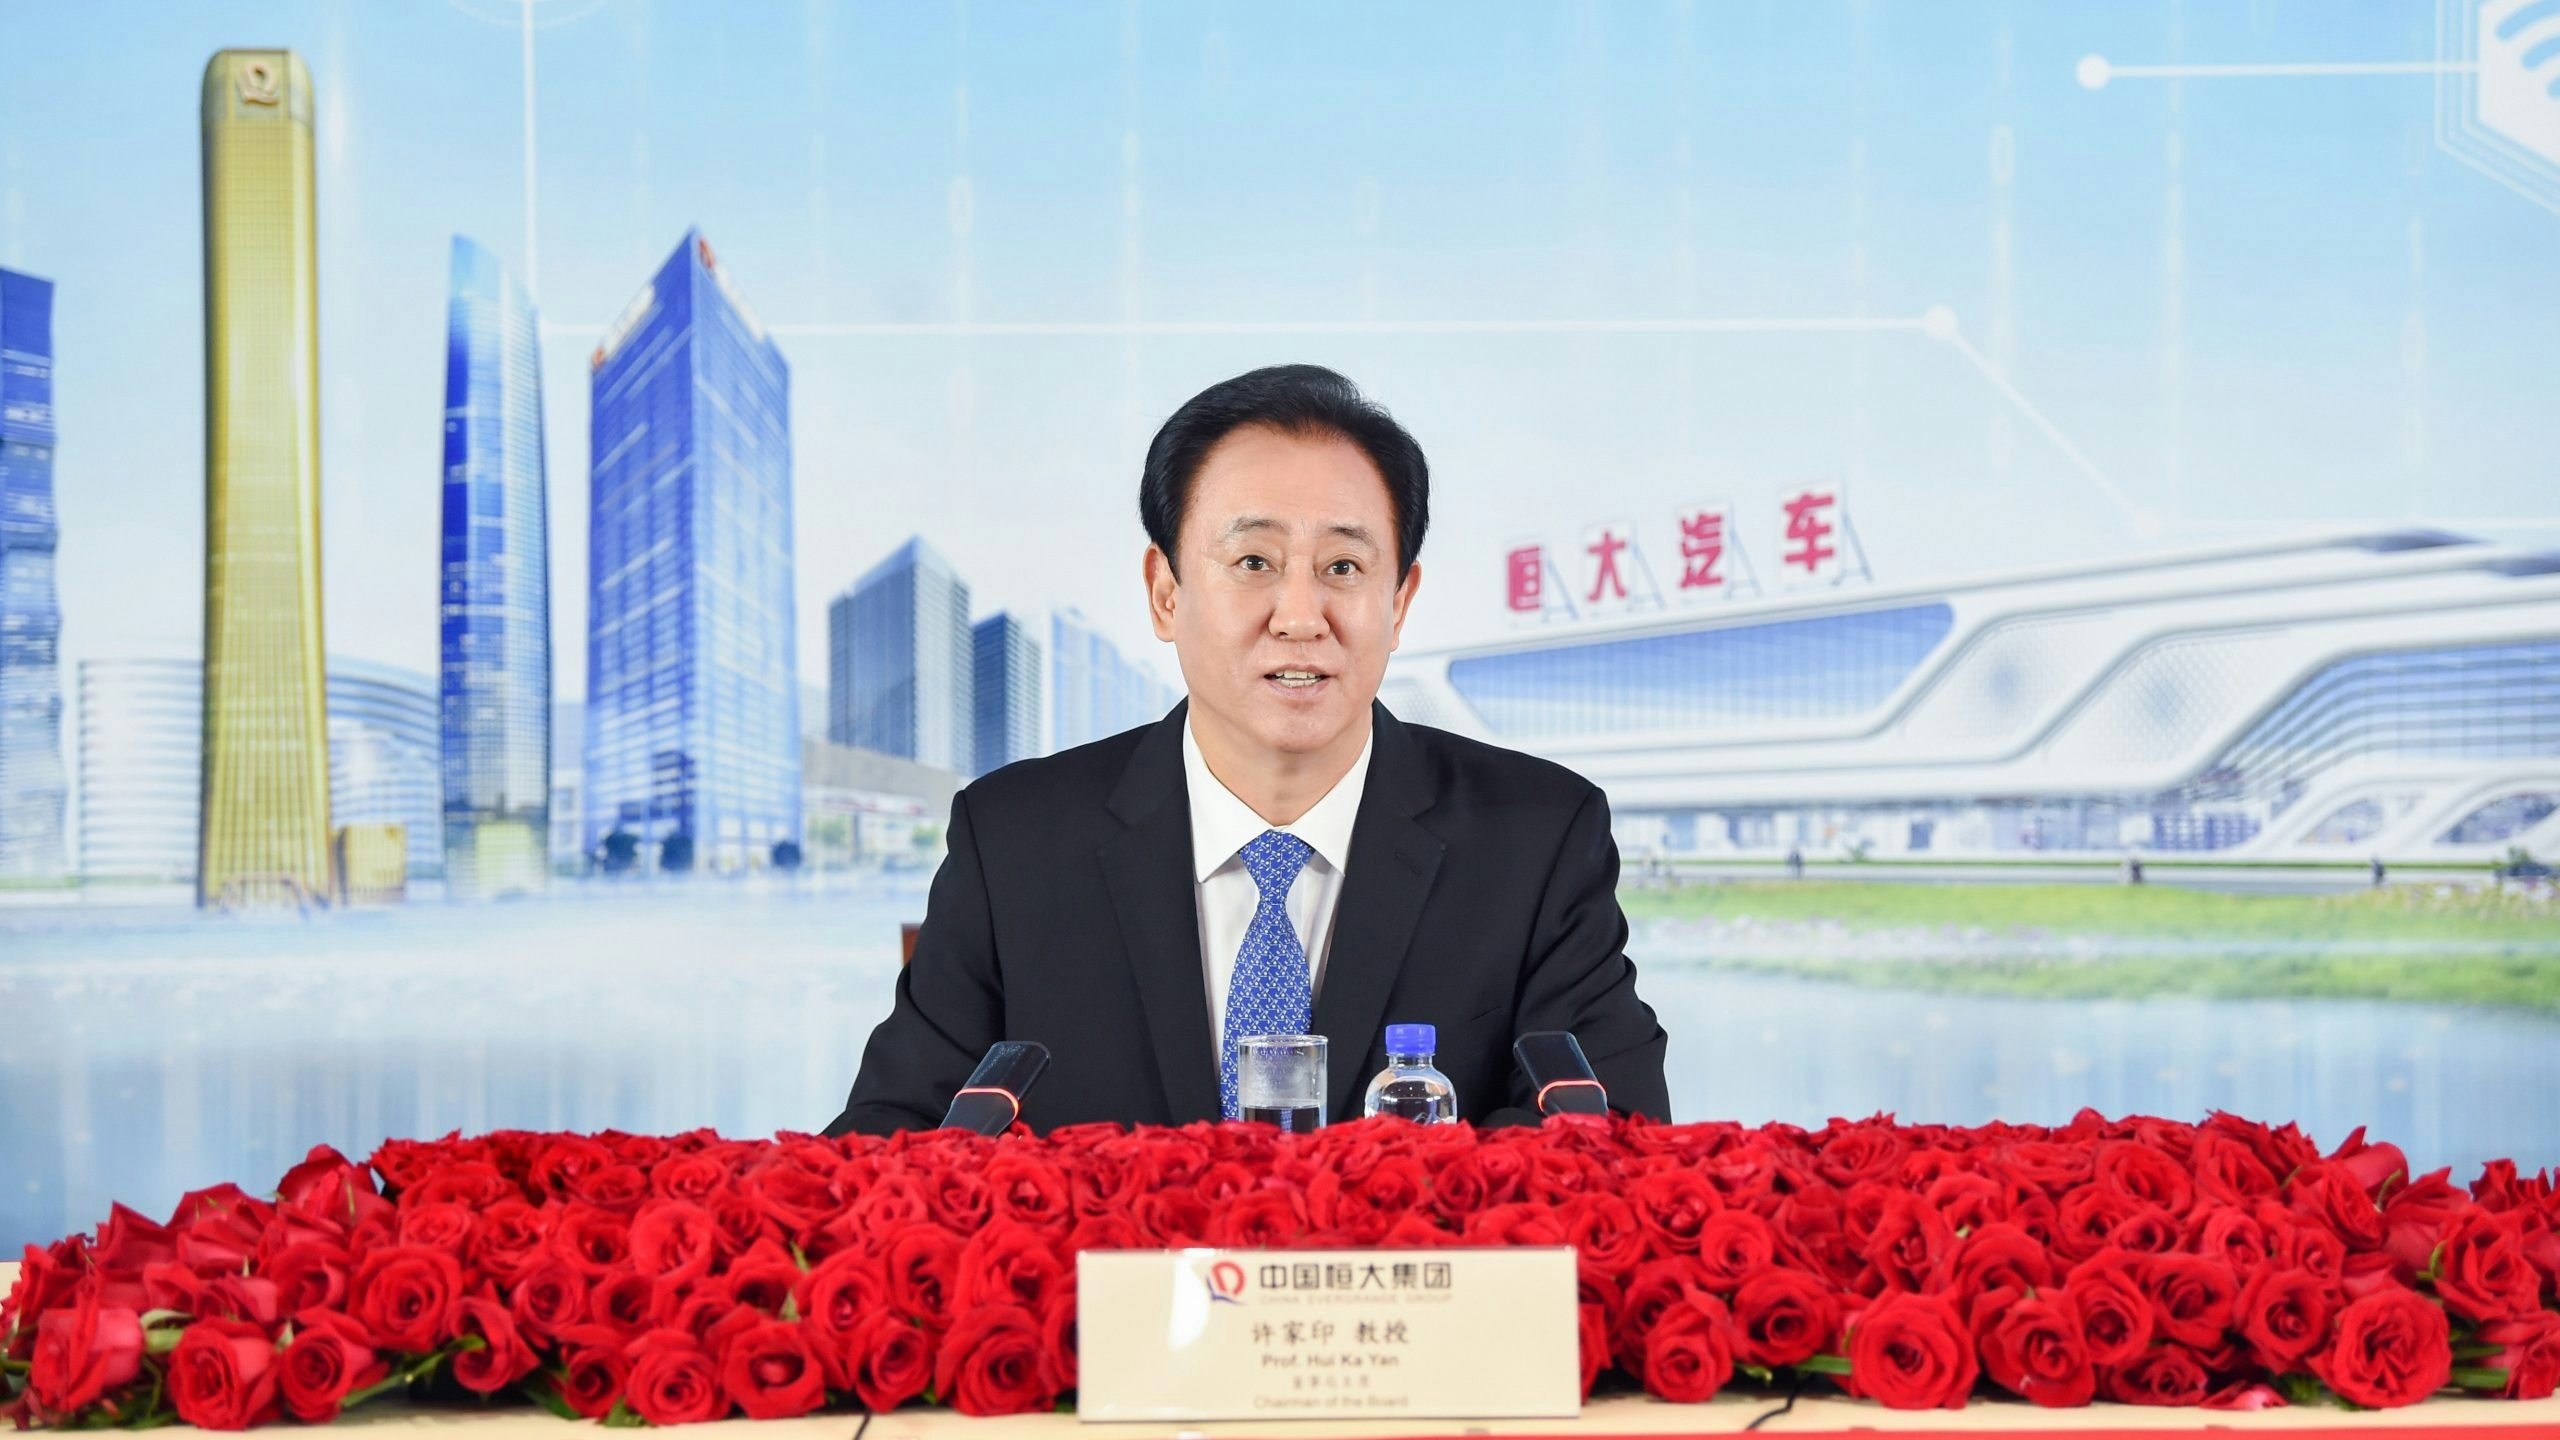 Chinese billionaire Hui Ka Yan is selling off as much equity as he possibly can to keep Evergrande afloat, but will it be enough? Photo: Courtesy of Evergrande 